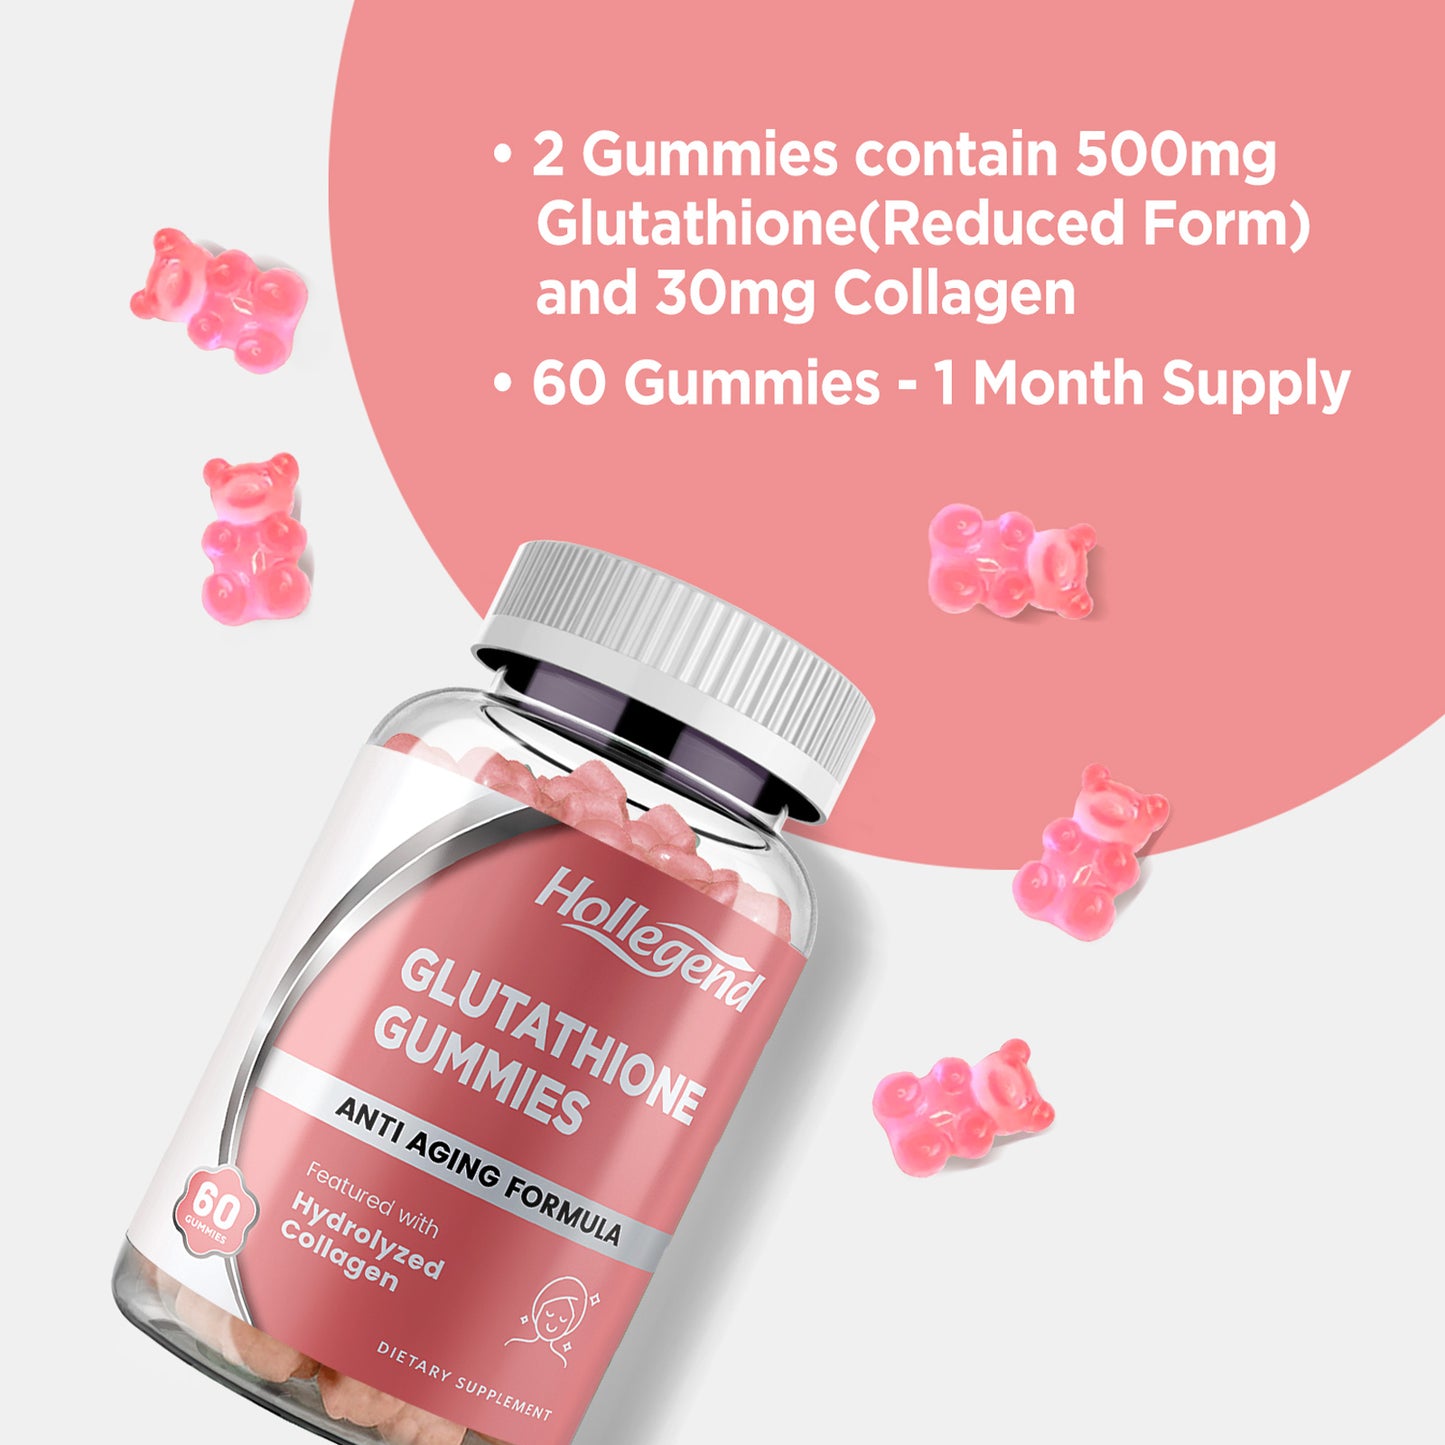 Reduced Glutathione 500mg Gummies, L-Glutathione with Collagen Chewable Supplements for Skin Care, Liver Support, Antioxidant, Immune System, 60 Count